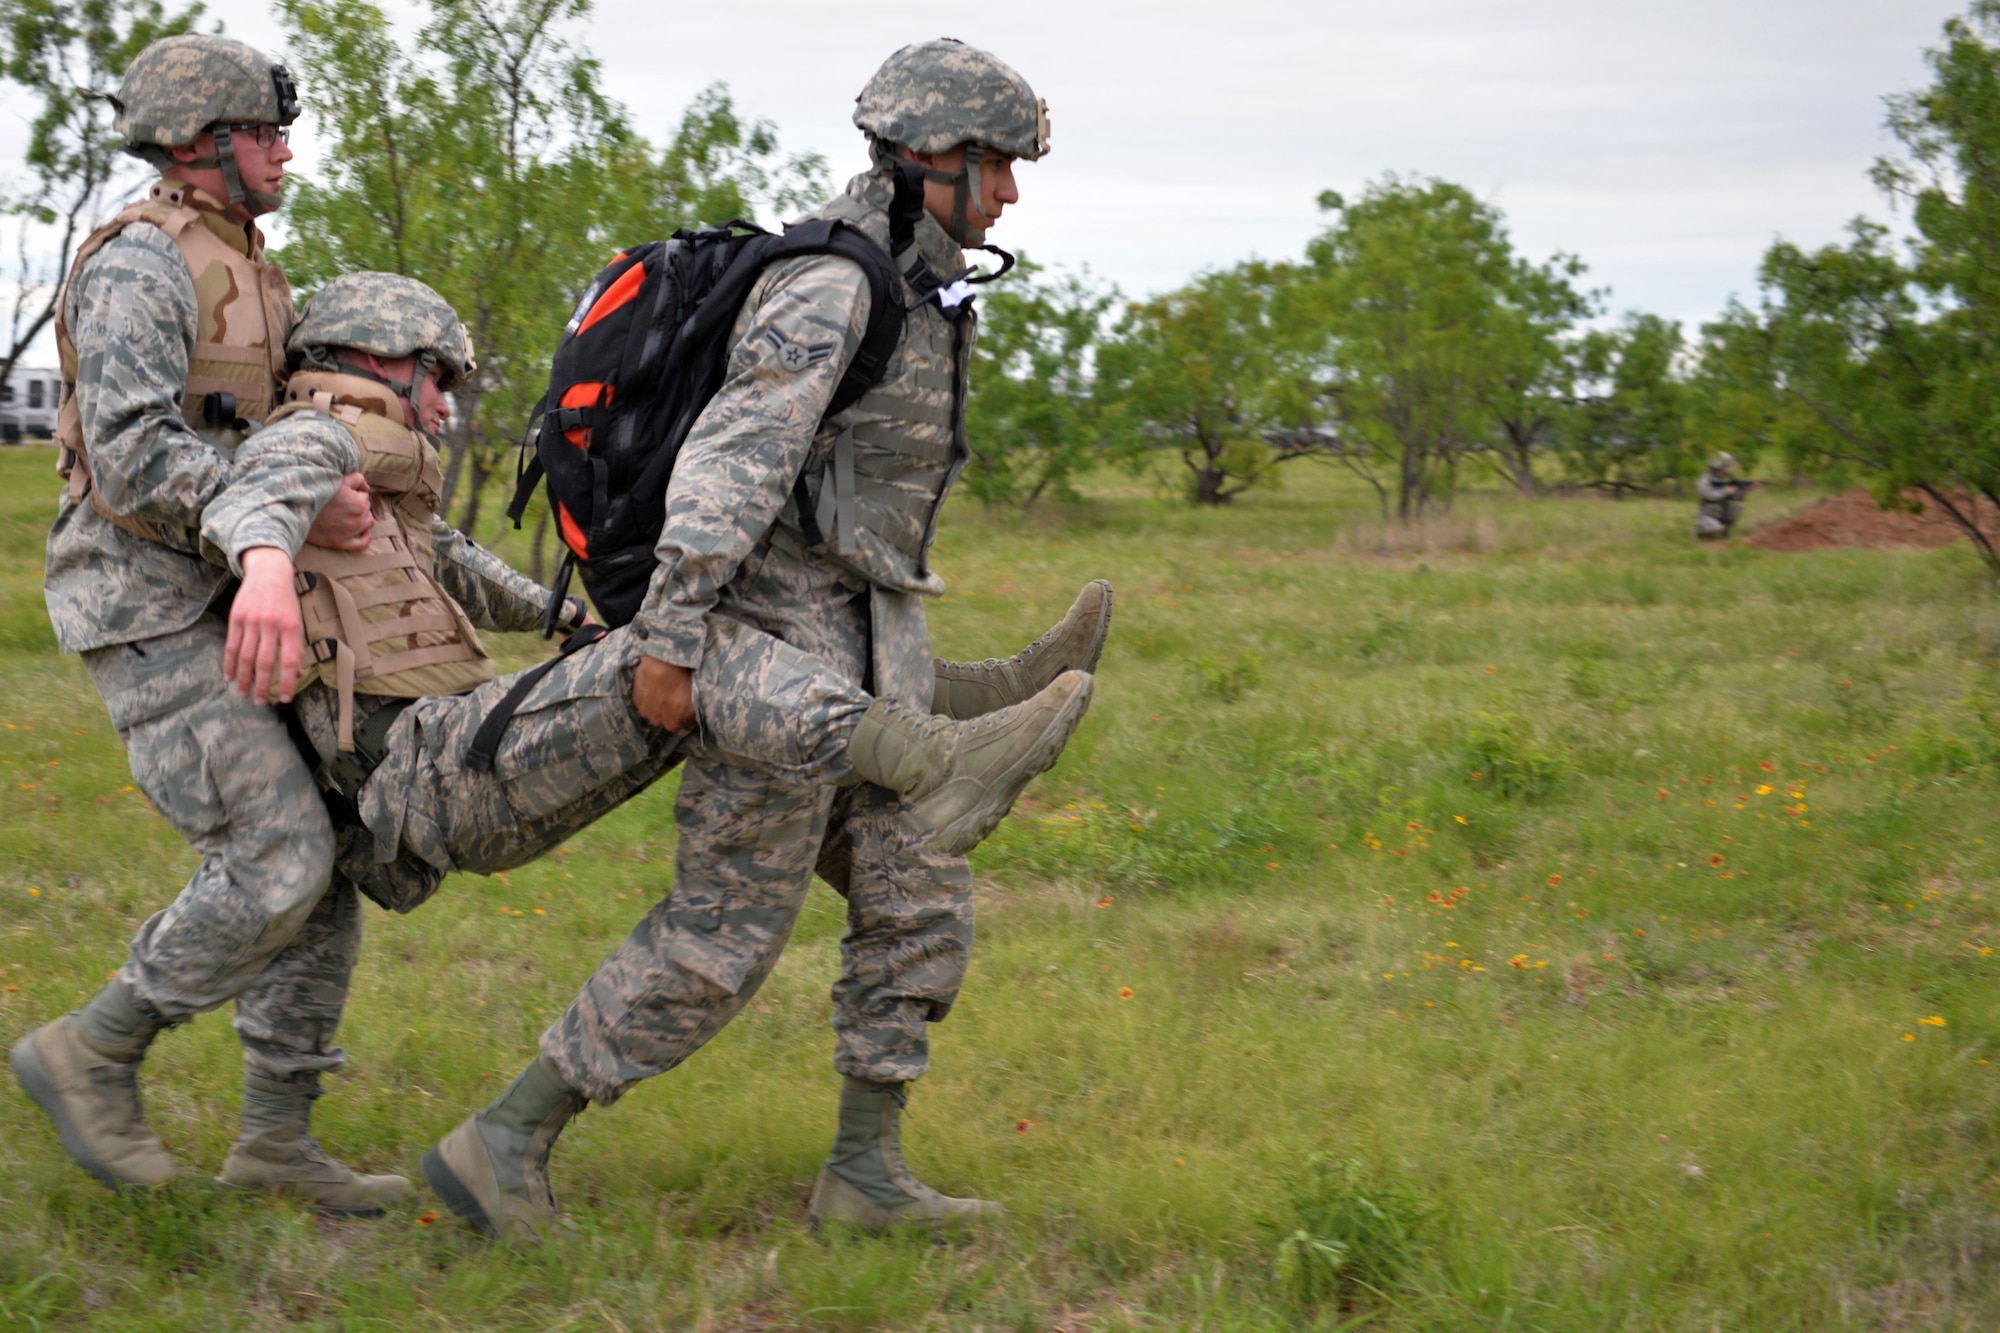 Two Angelo State University Air Force ROTC Detachment 847 Cadets carry a “wounded” Airman after encountering an Improvised Explosve Device during a field training exercise at Camp Sentinel on Goodfellow Air Force Base, Texas, April 22, 2017. During the first half of day-one, the cadets learned a variety of skills to include Self-Aid and Buddy Care, weapon familiarization and leading group movements, which were tested in mock combat conditions. (U.S. Air Force photo by Airman 1st Class Randall Moose/Released)